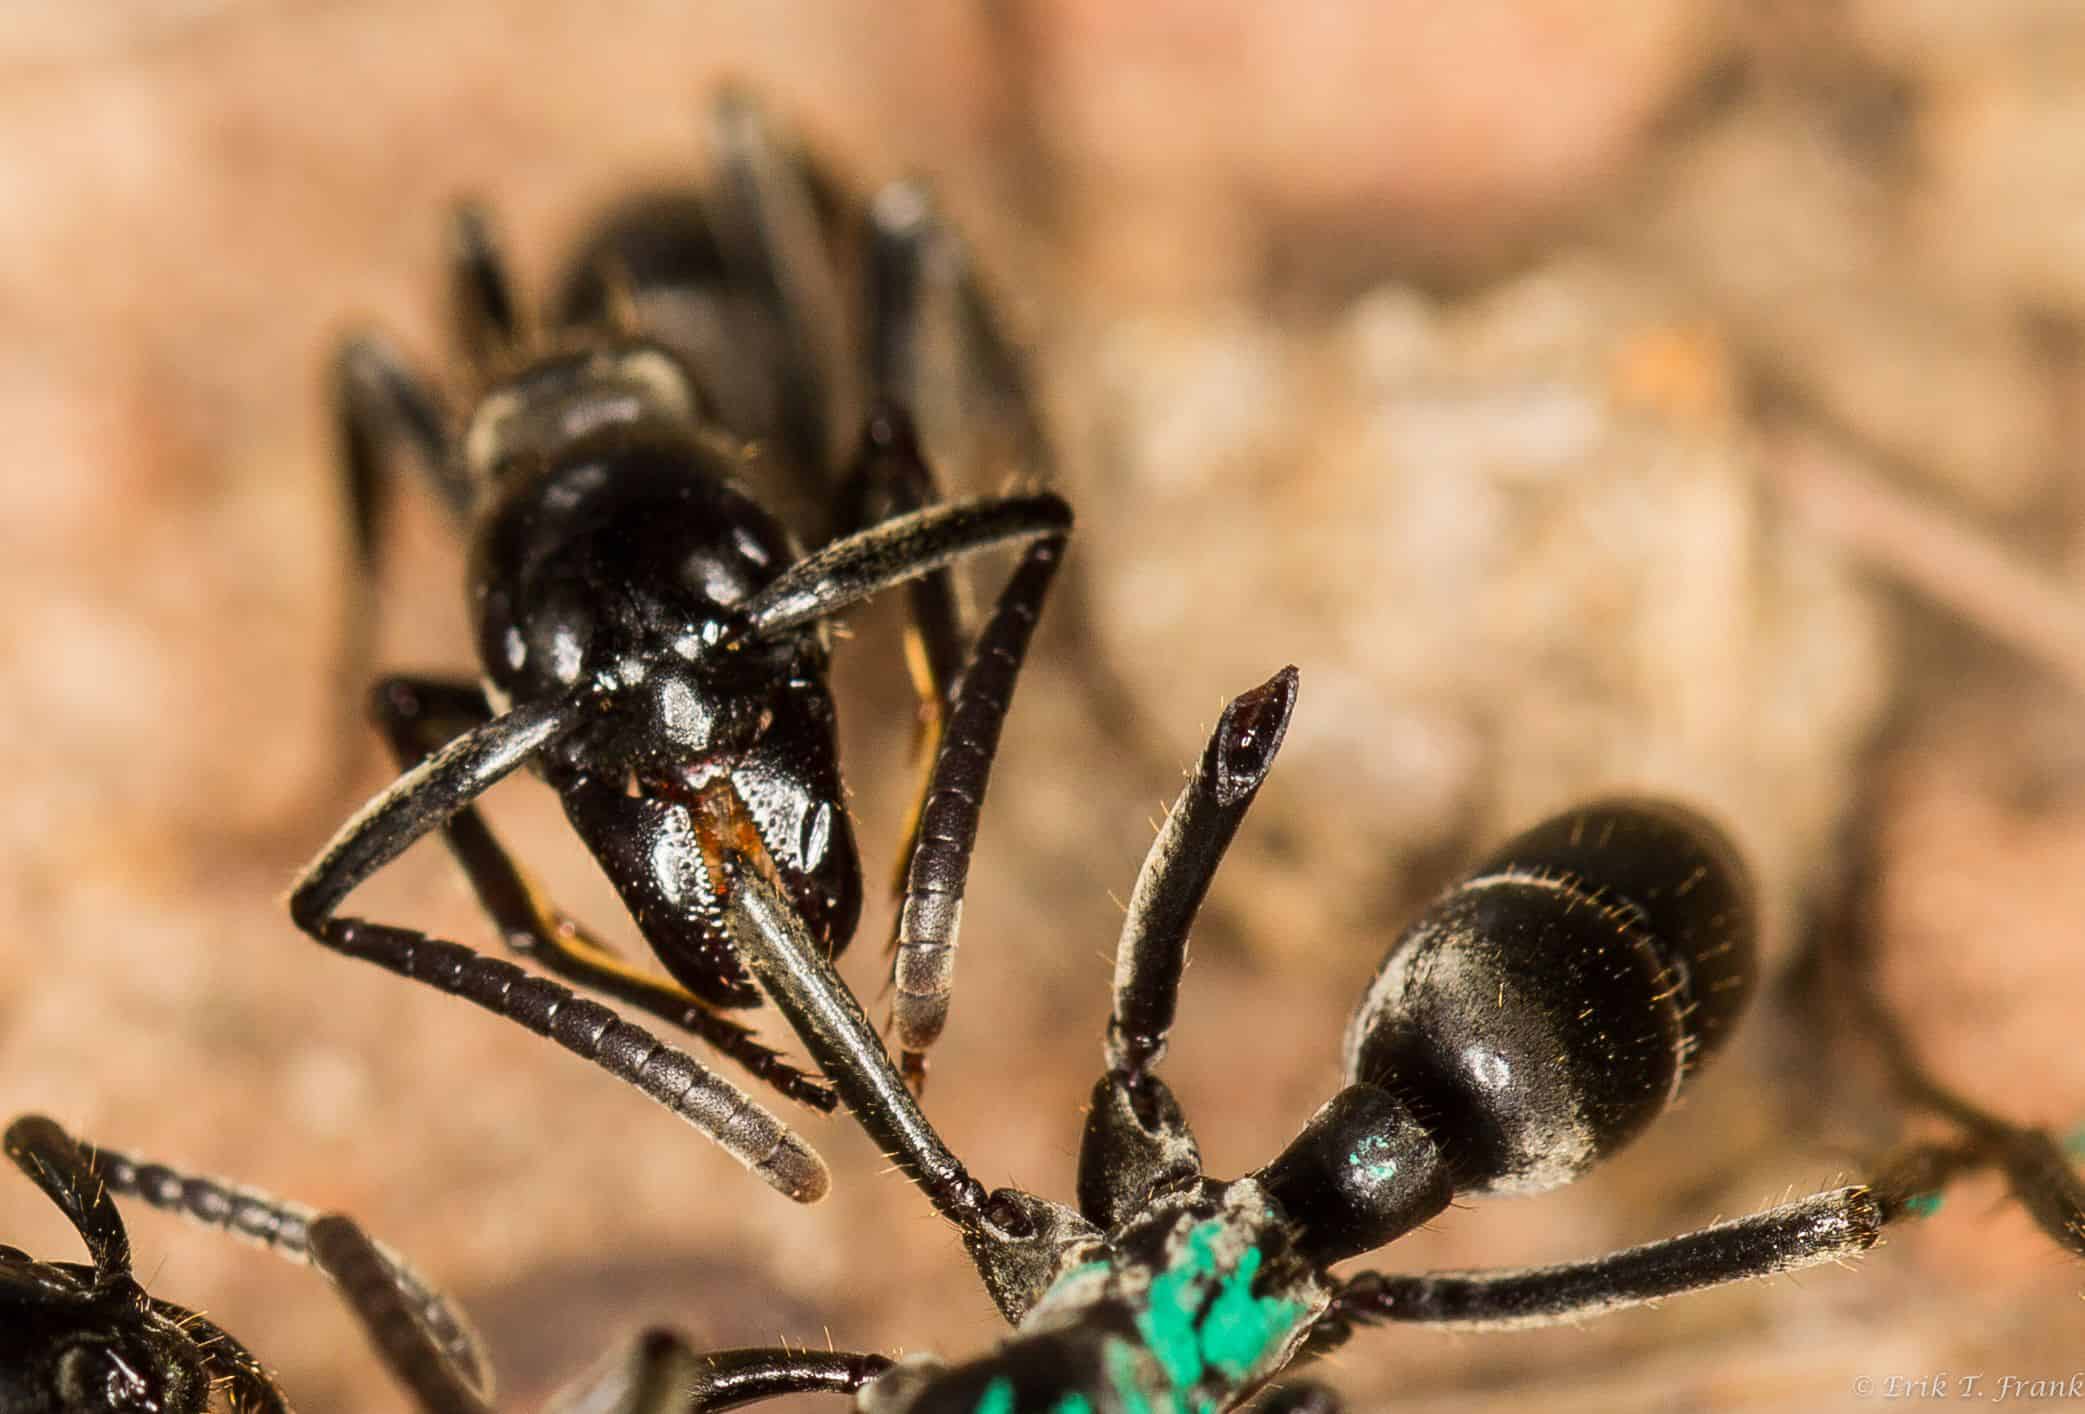 A Matabele ant tends the wound of a fellow ant whose legs were bitten off in a fight with termites